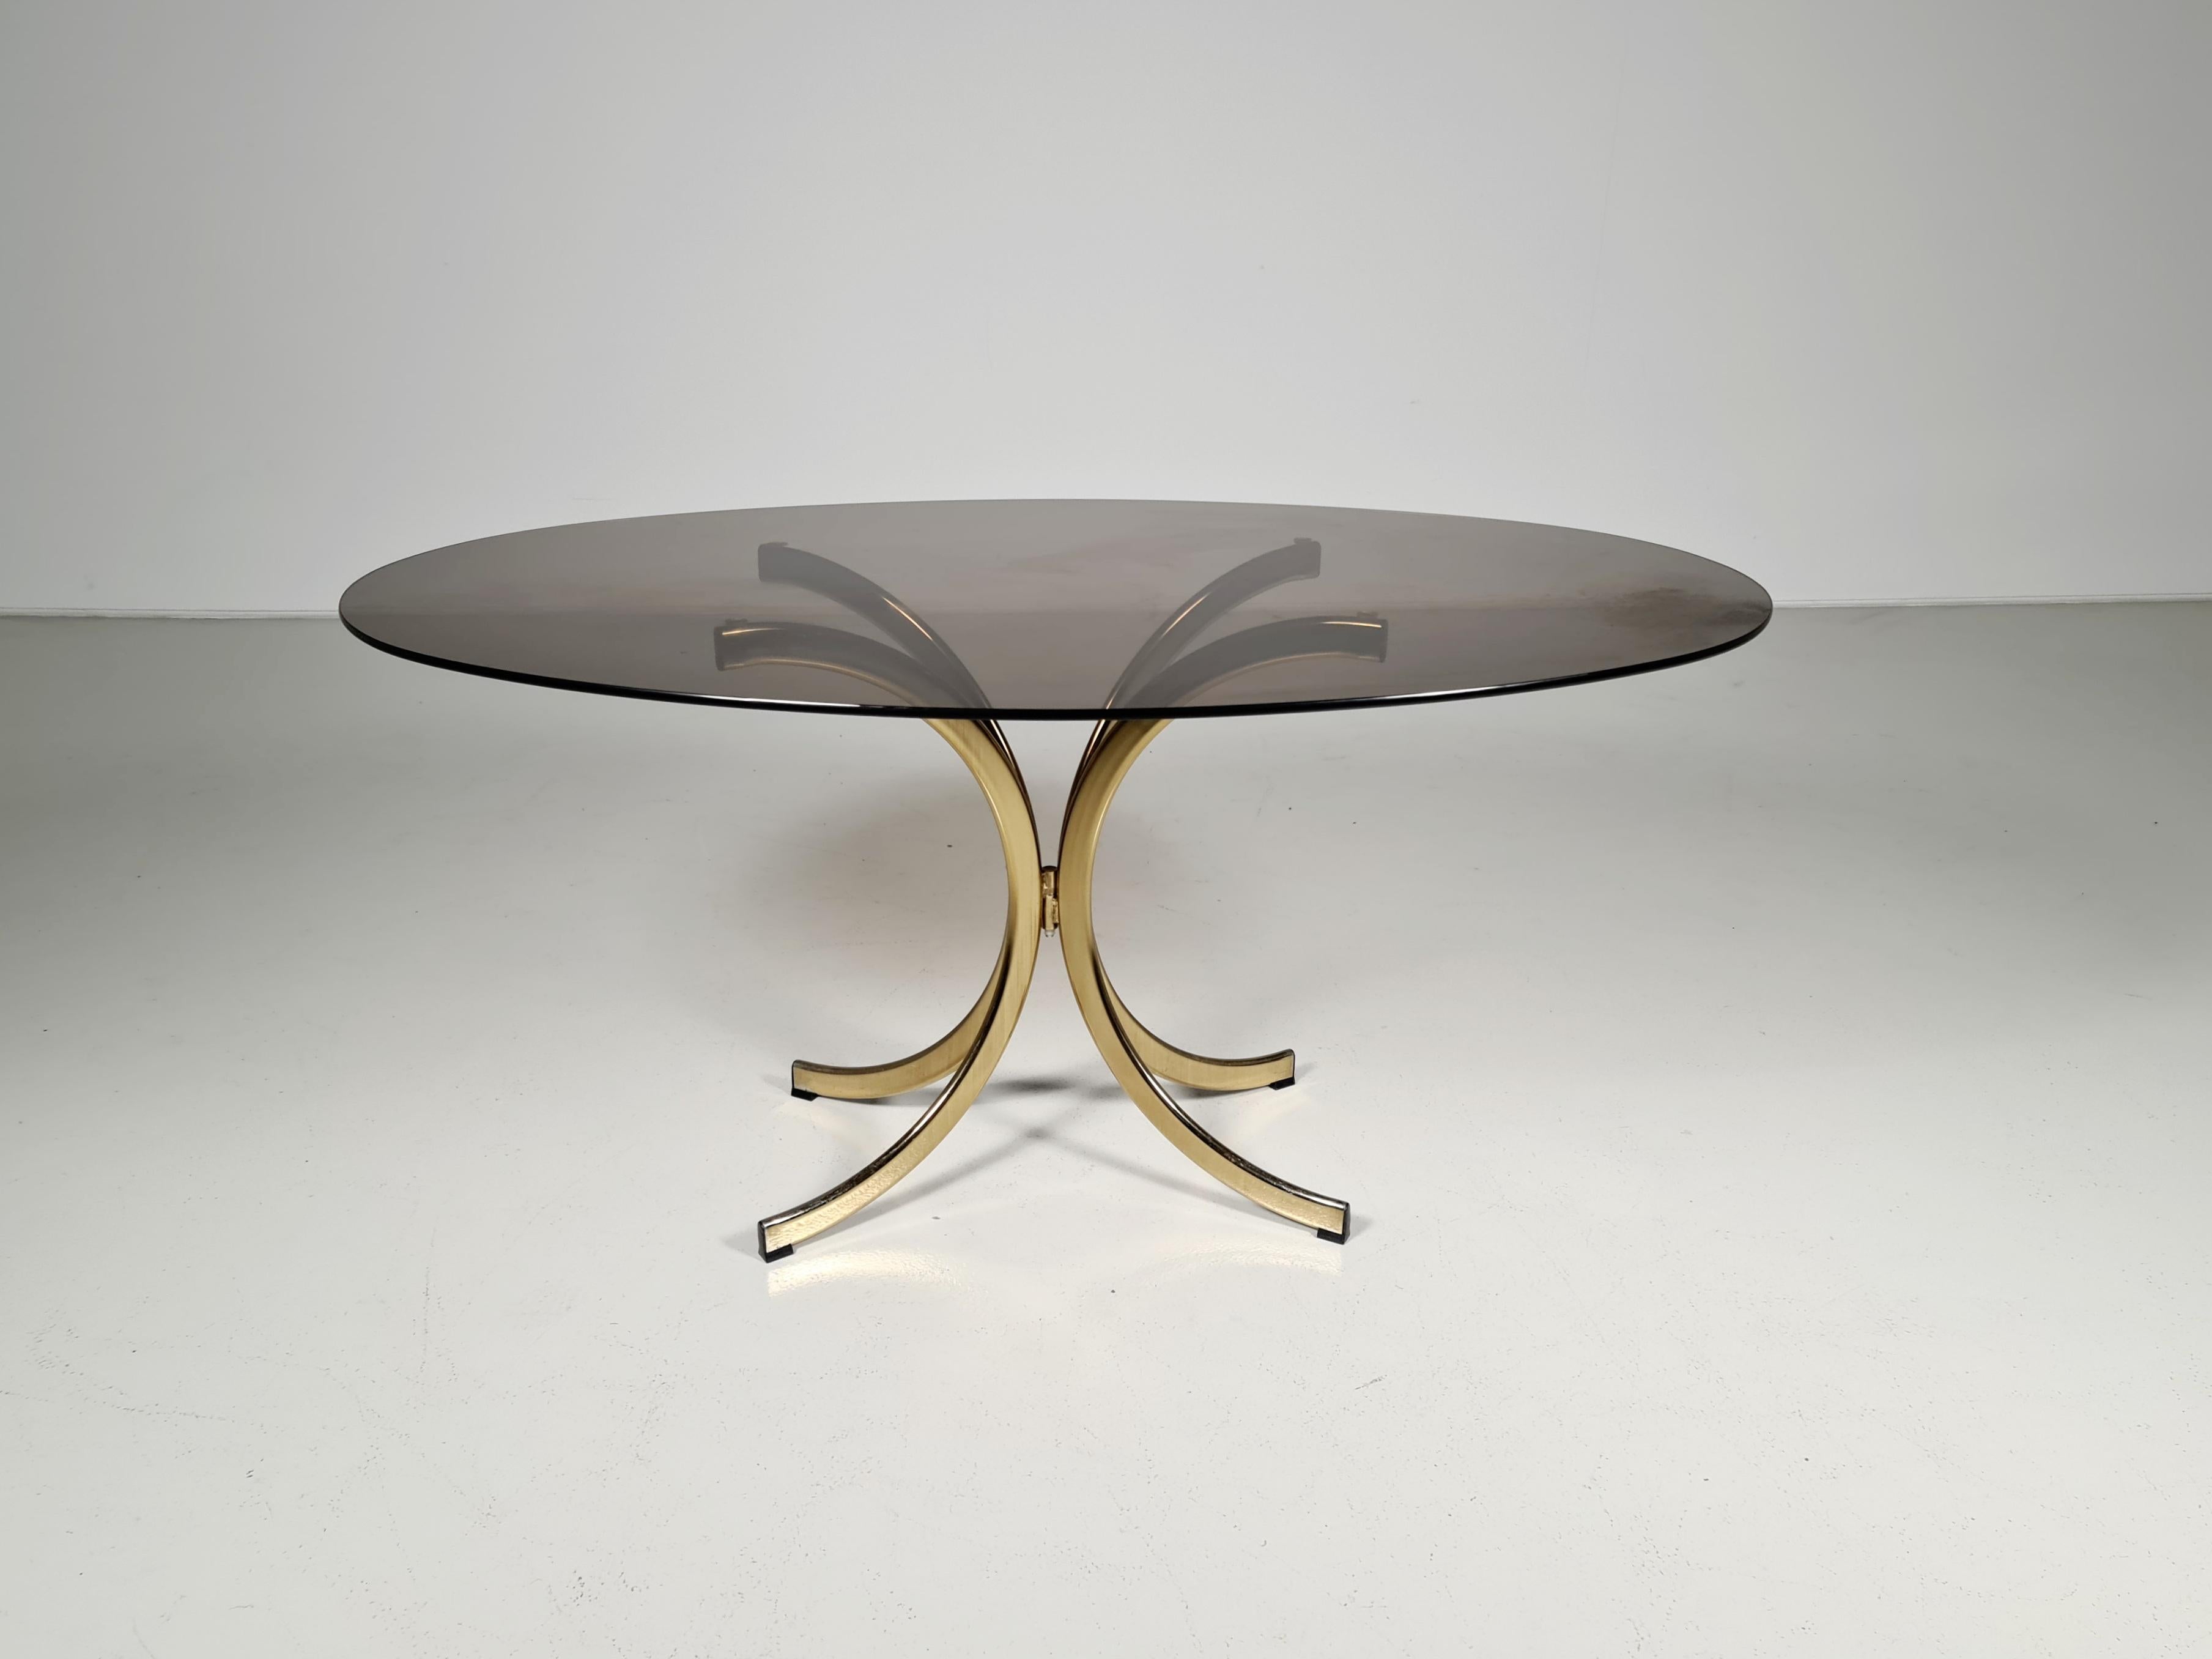 Vintage brass oval dining table with a smoked glass plate. The table is from the 1970s. the brass base with some beautiful patina, glass plate minor wear. Overall a beautiful condition. The design is attributed to Romeo Rega or Paolo Buffa, a very